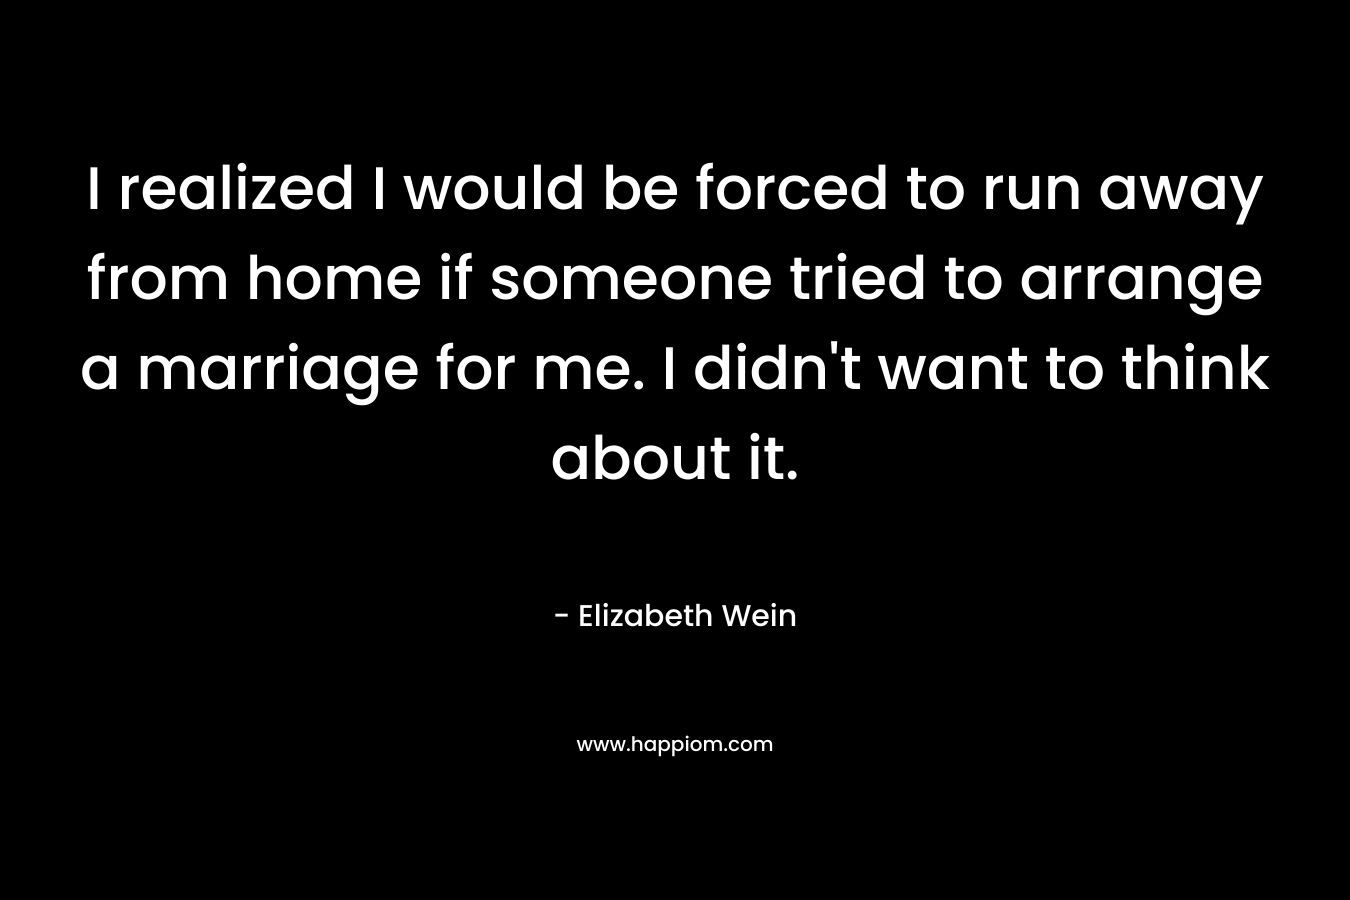 I realized I would be forced to run away from home if someone tried to arrange a marriage for me. I didn't want to think about it.